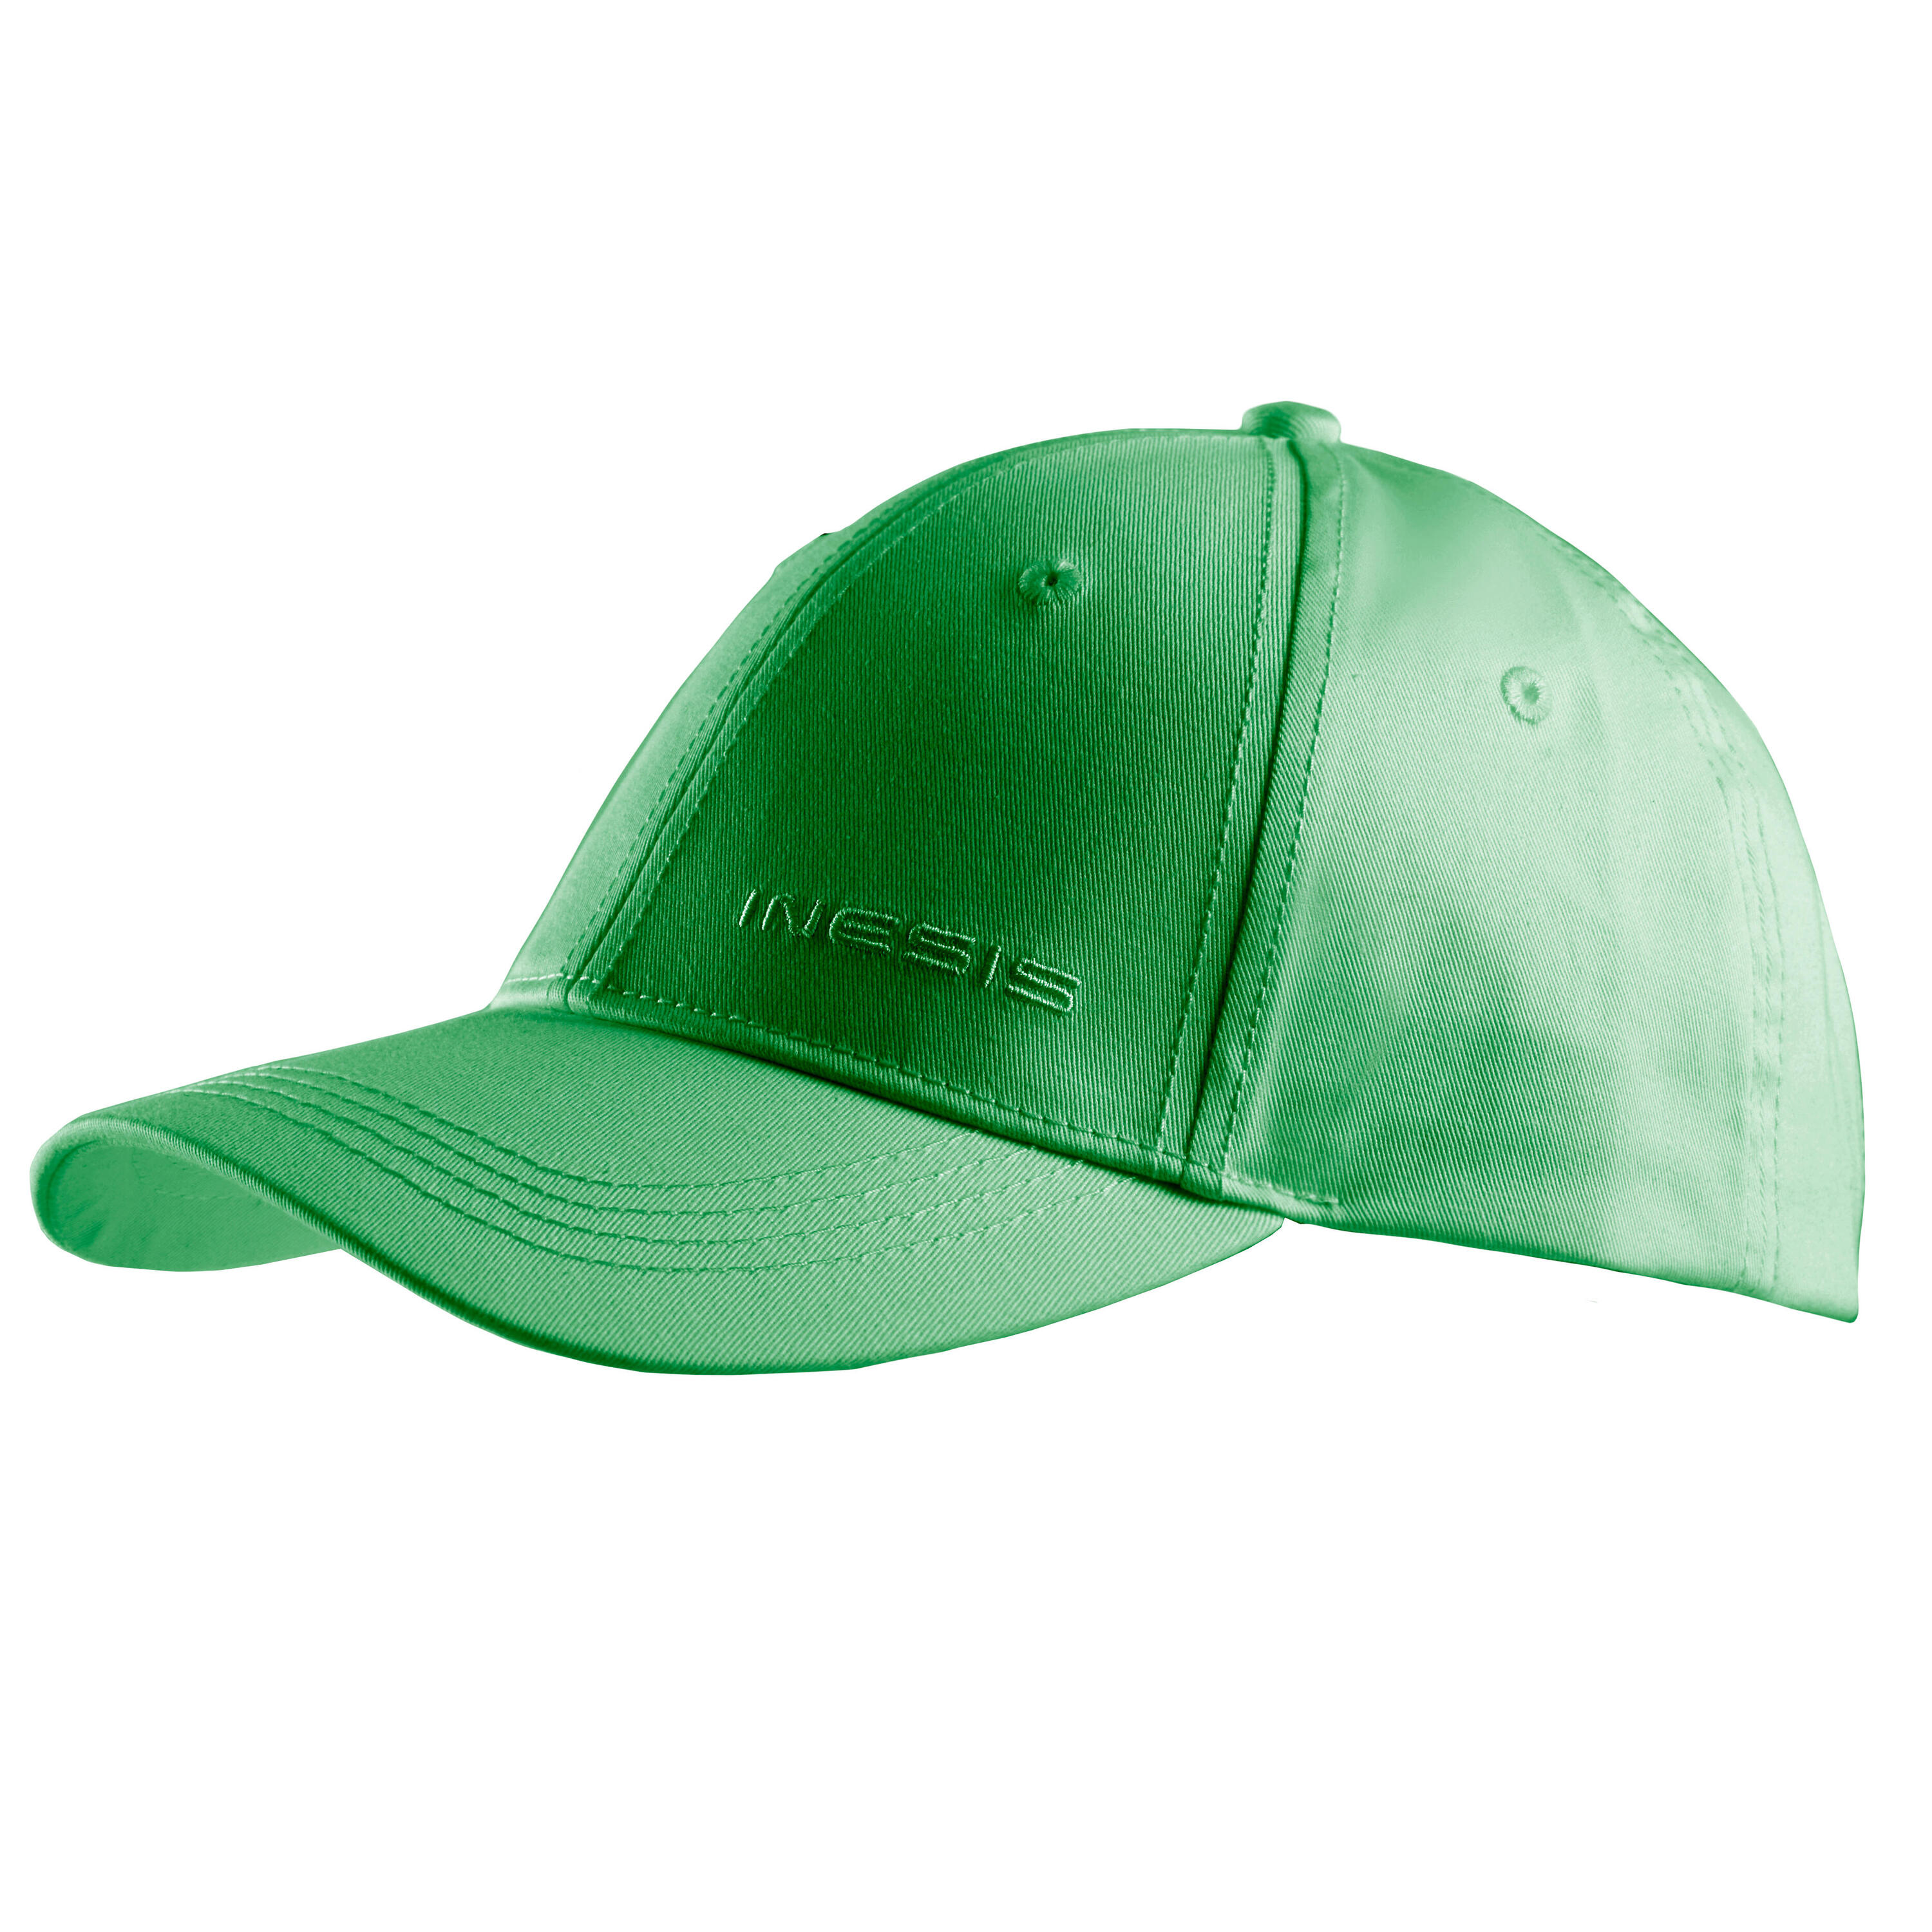 Adult's golf cap - MW 500 forest green 1/3